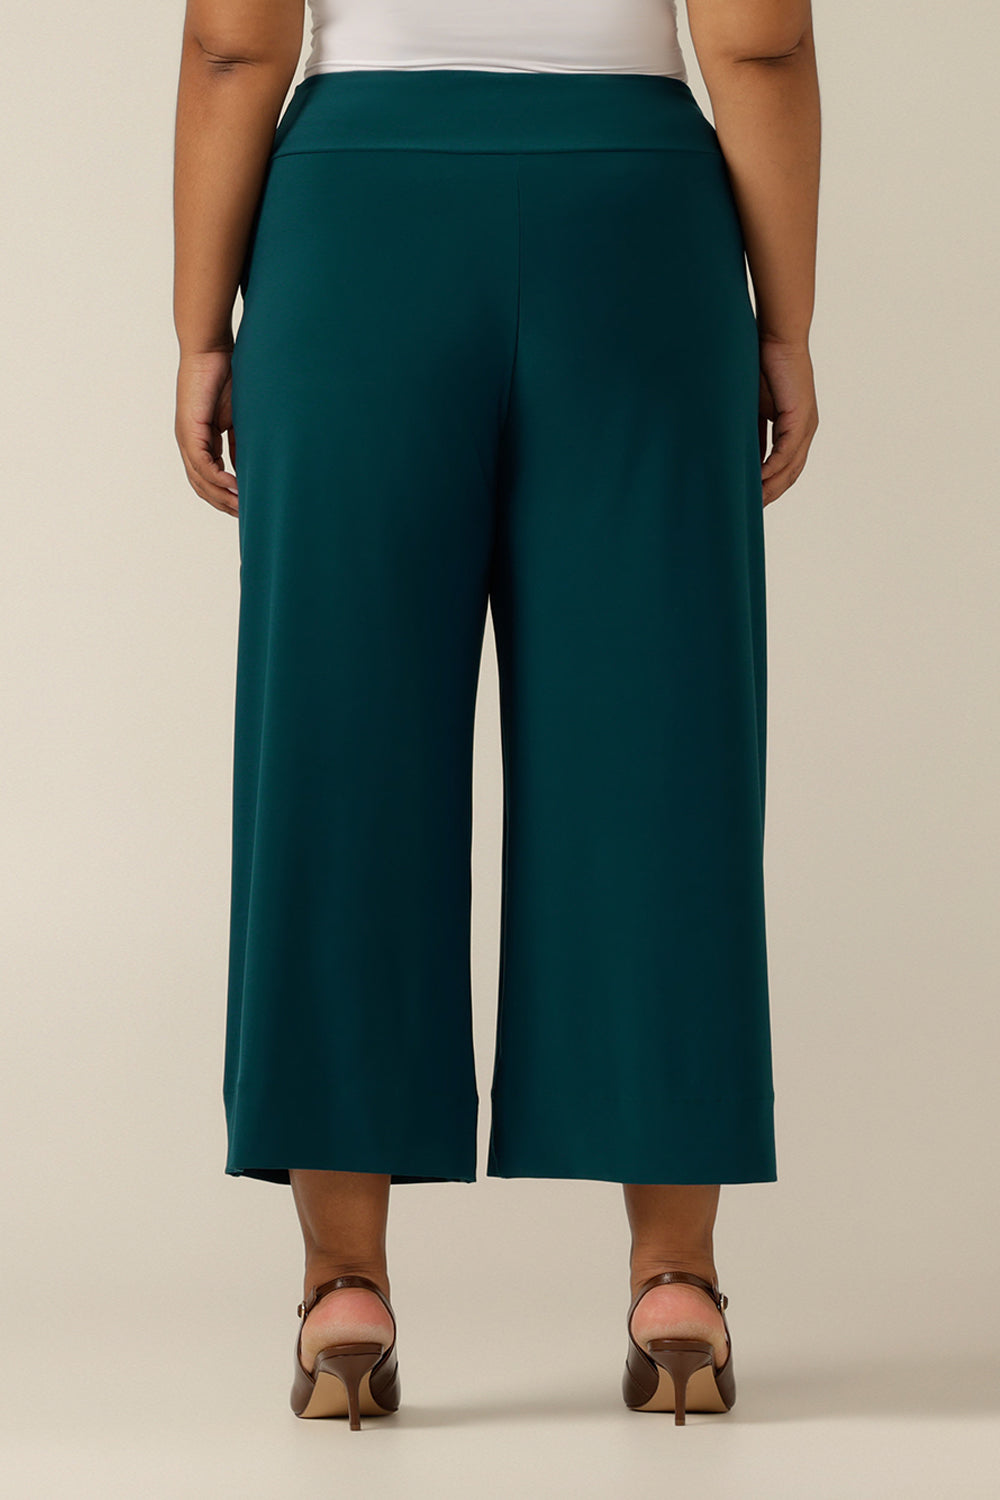 A close up of an Australian-made wide leg, cropped length jersey trouser in petrol green in size 18. Made by Australian and New Zealand women's clothing label, L&F these quality culotte work pants promise to be a comfortable corporatewear trouser for sizes 8 to size 24. 